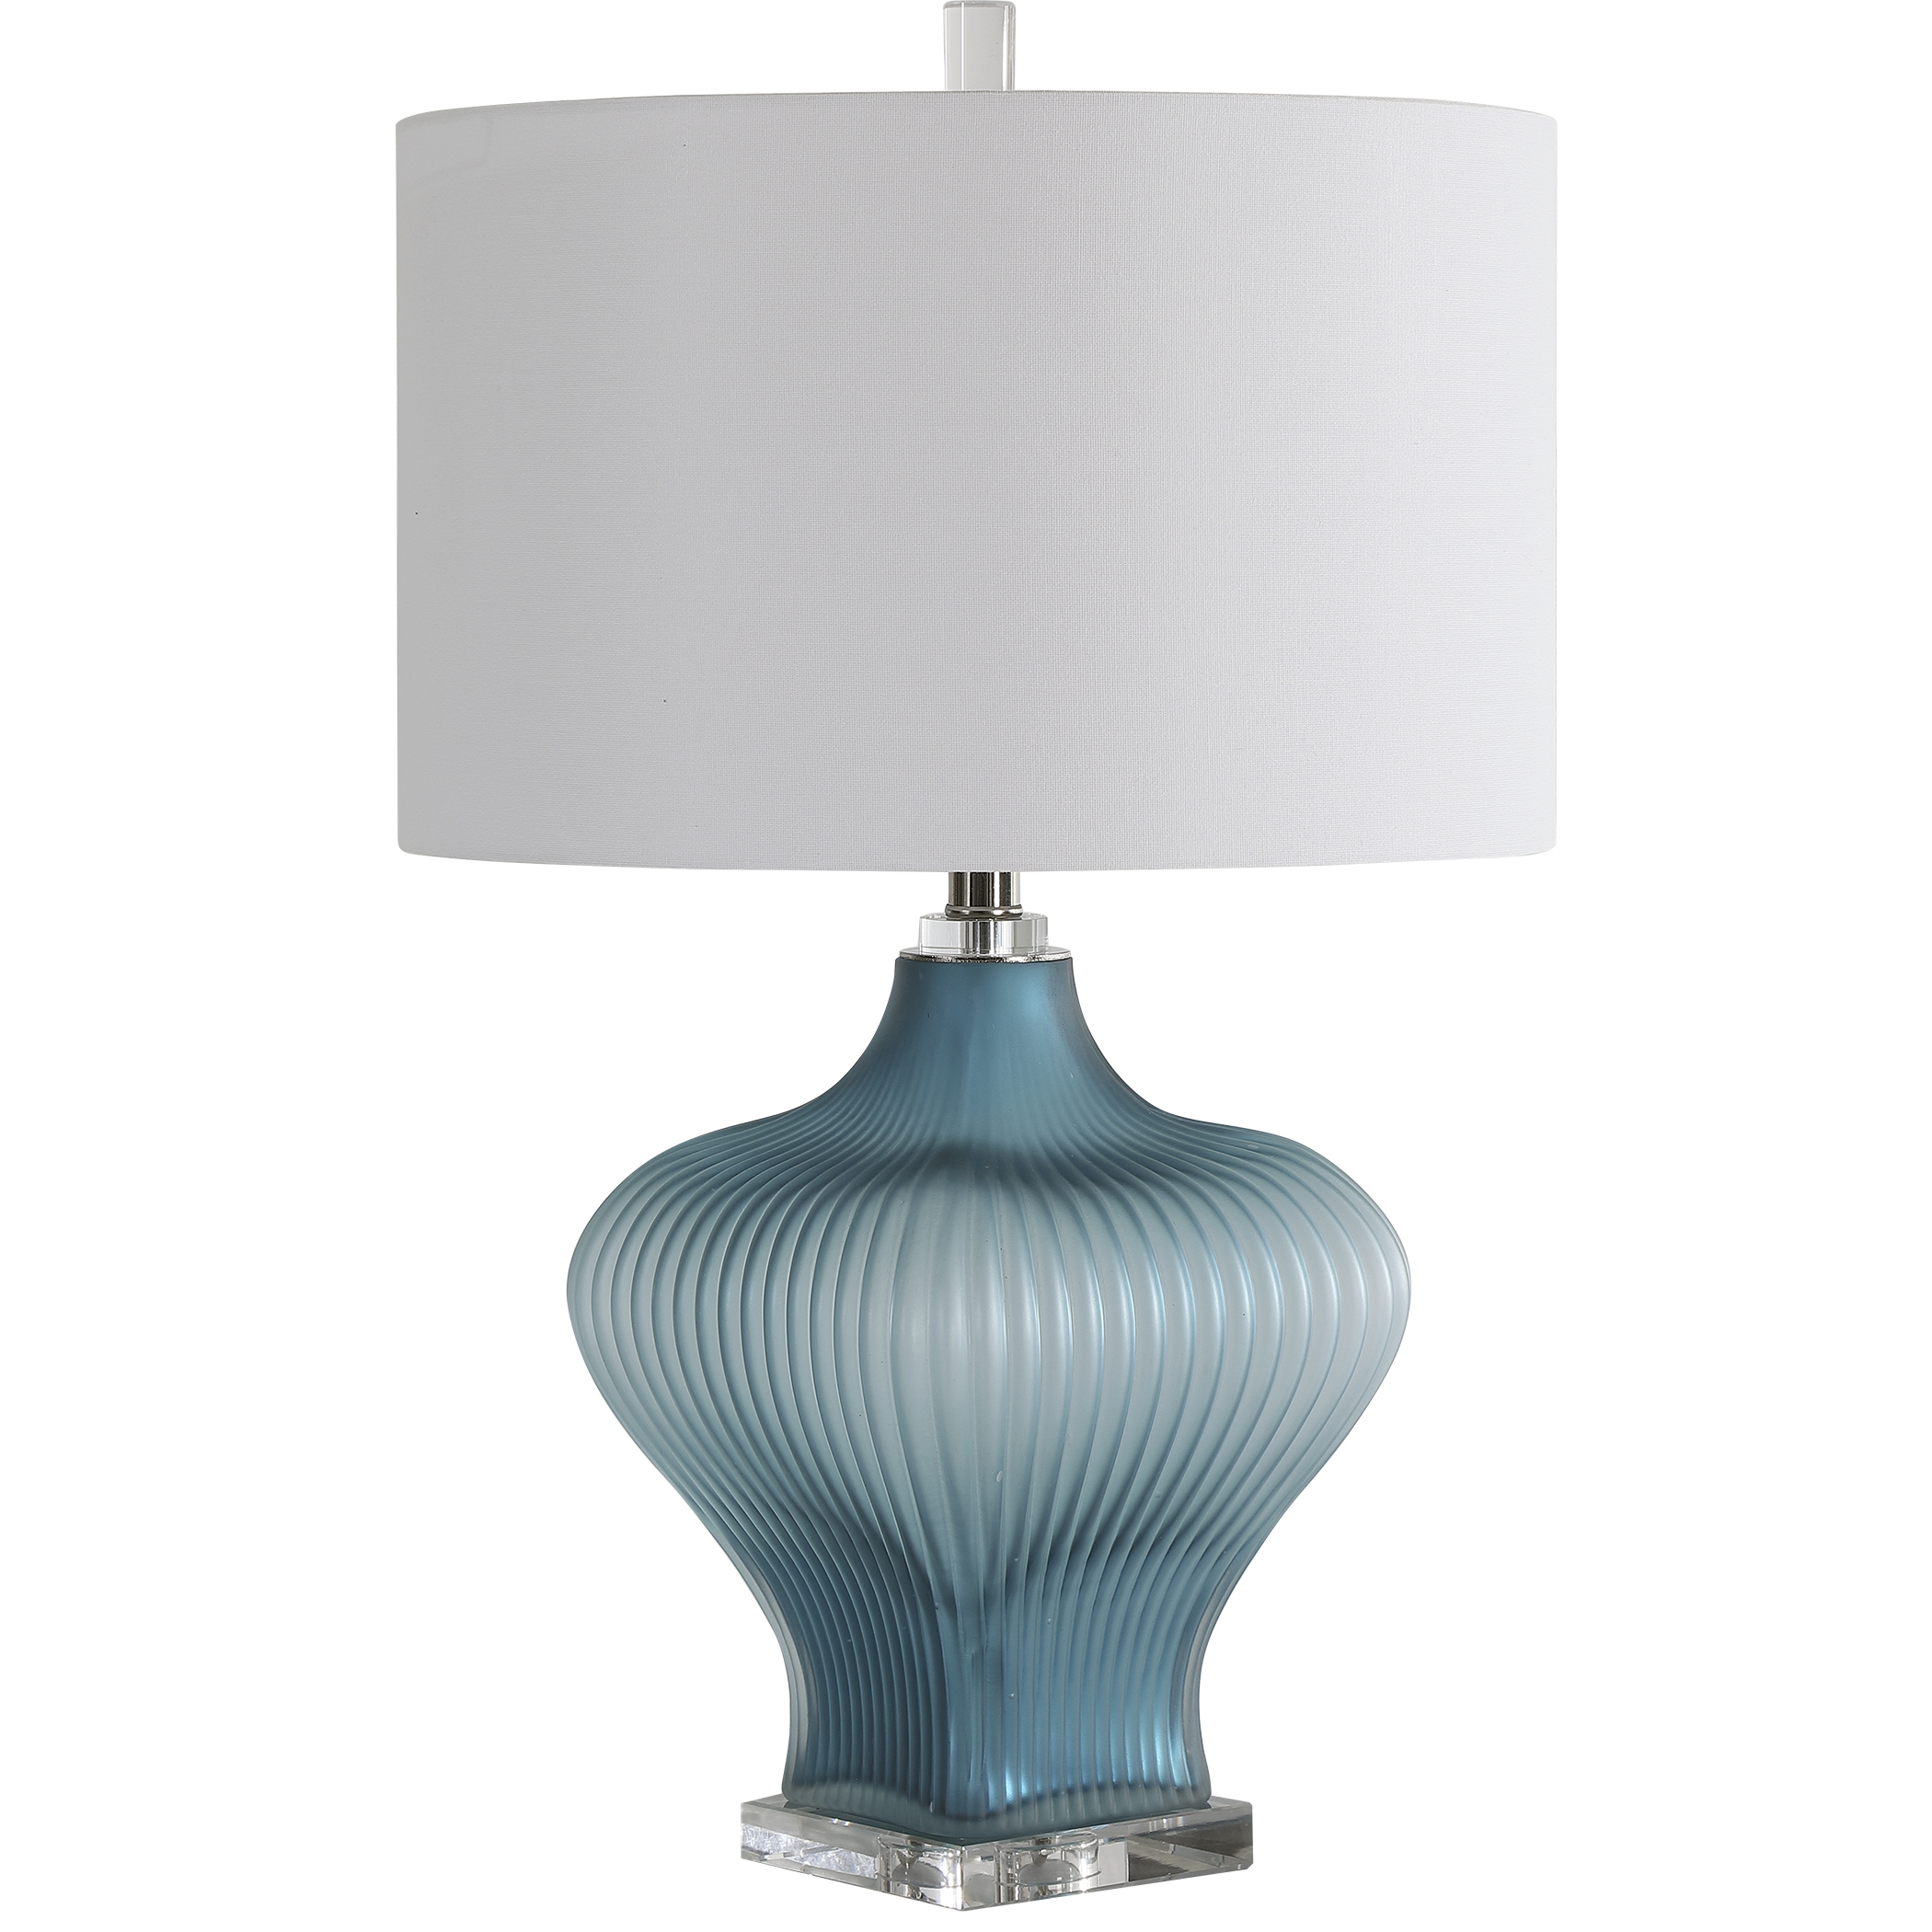 Marjorie Frosted Turquoise Table Lamp - Image 3